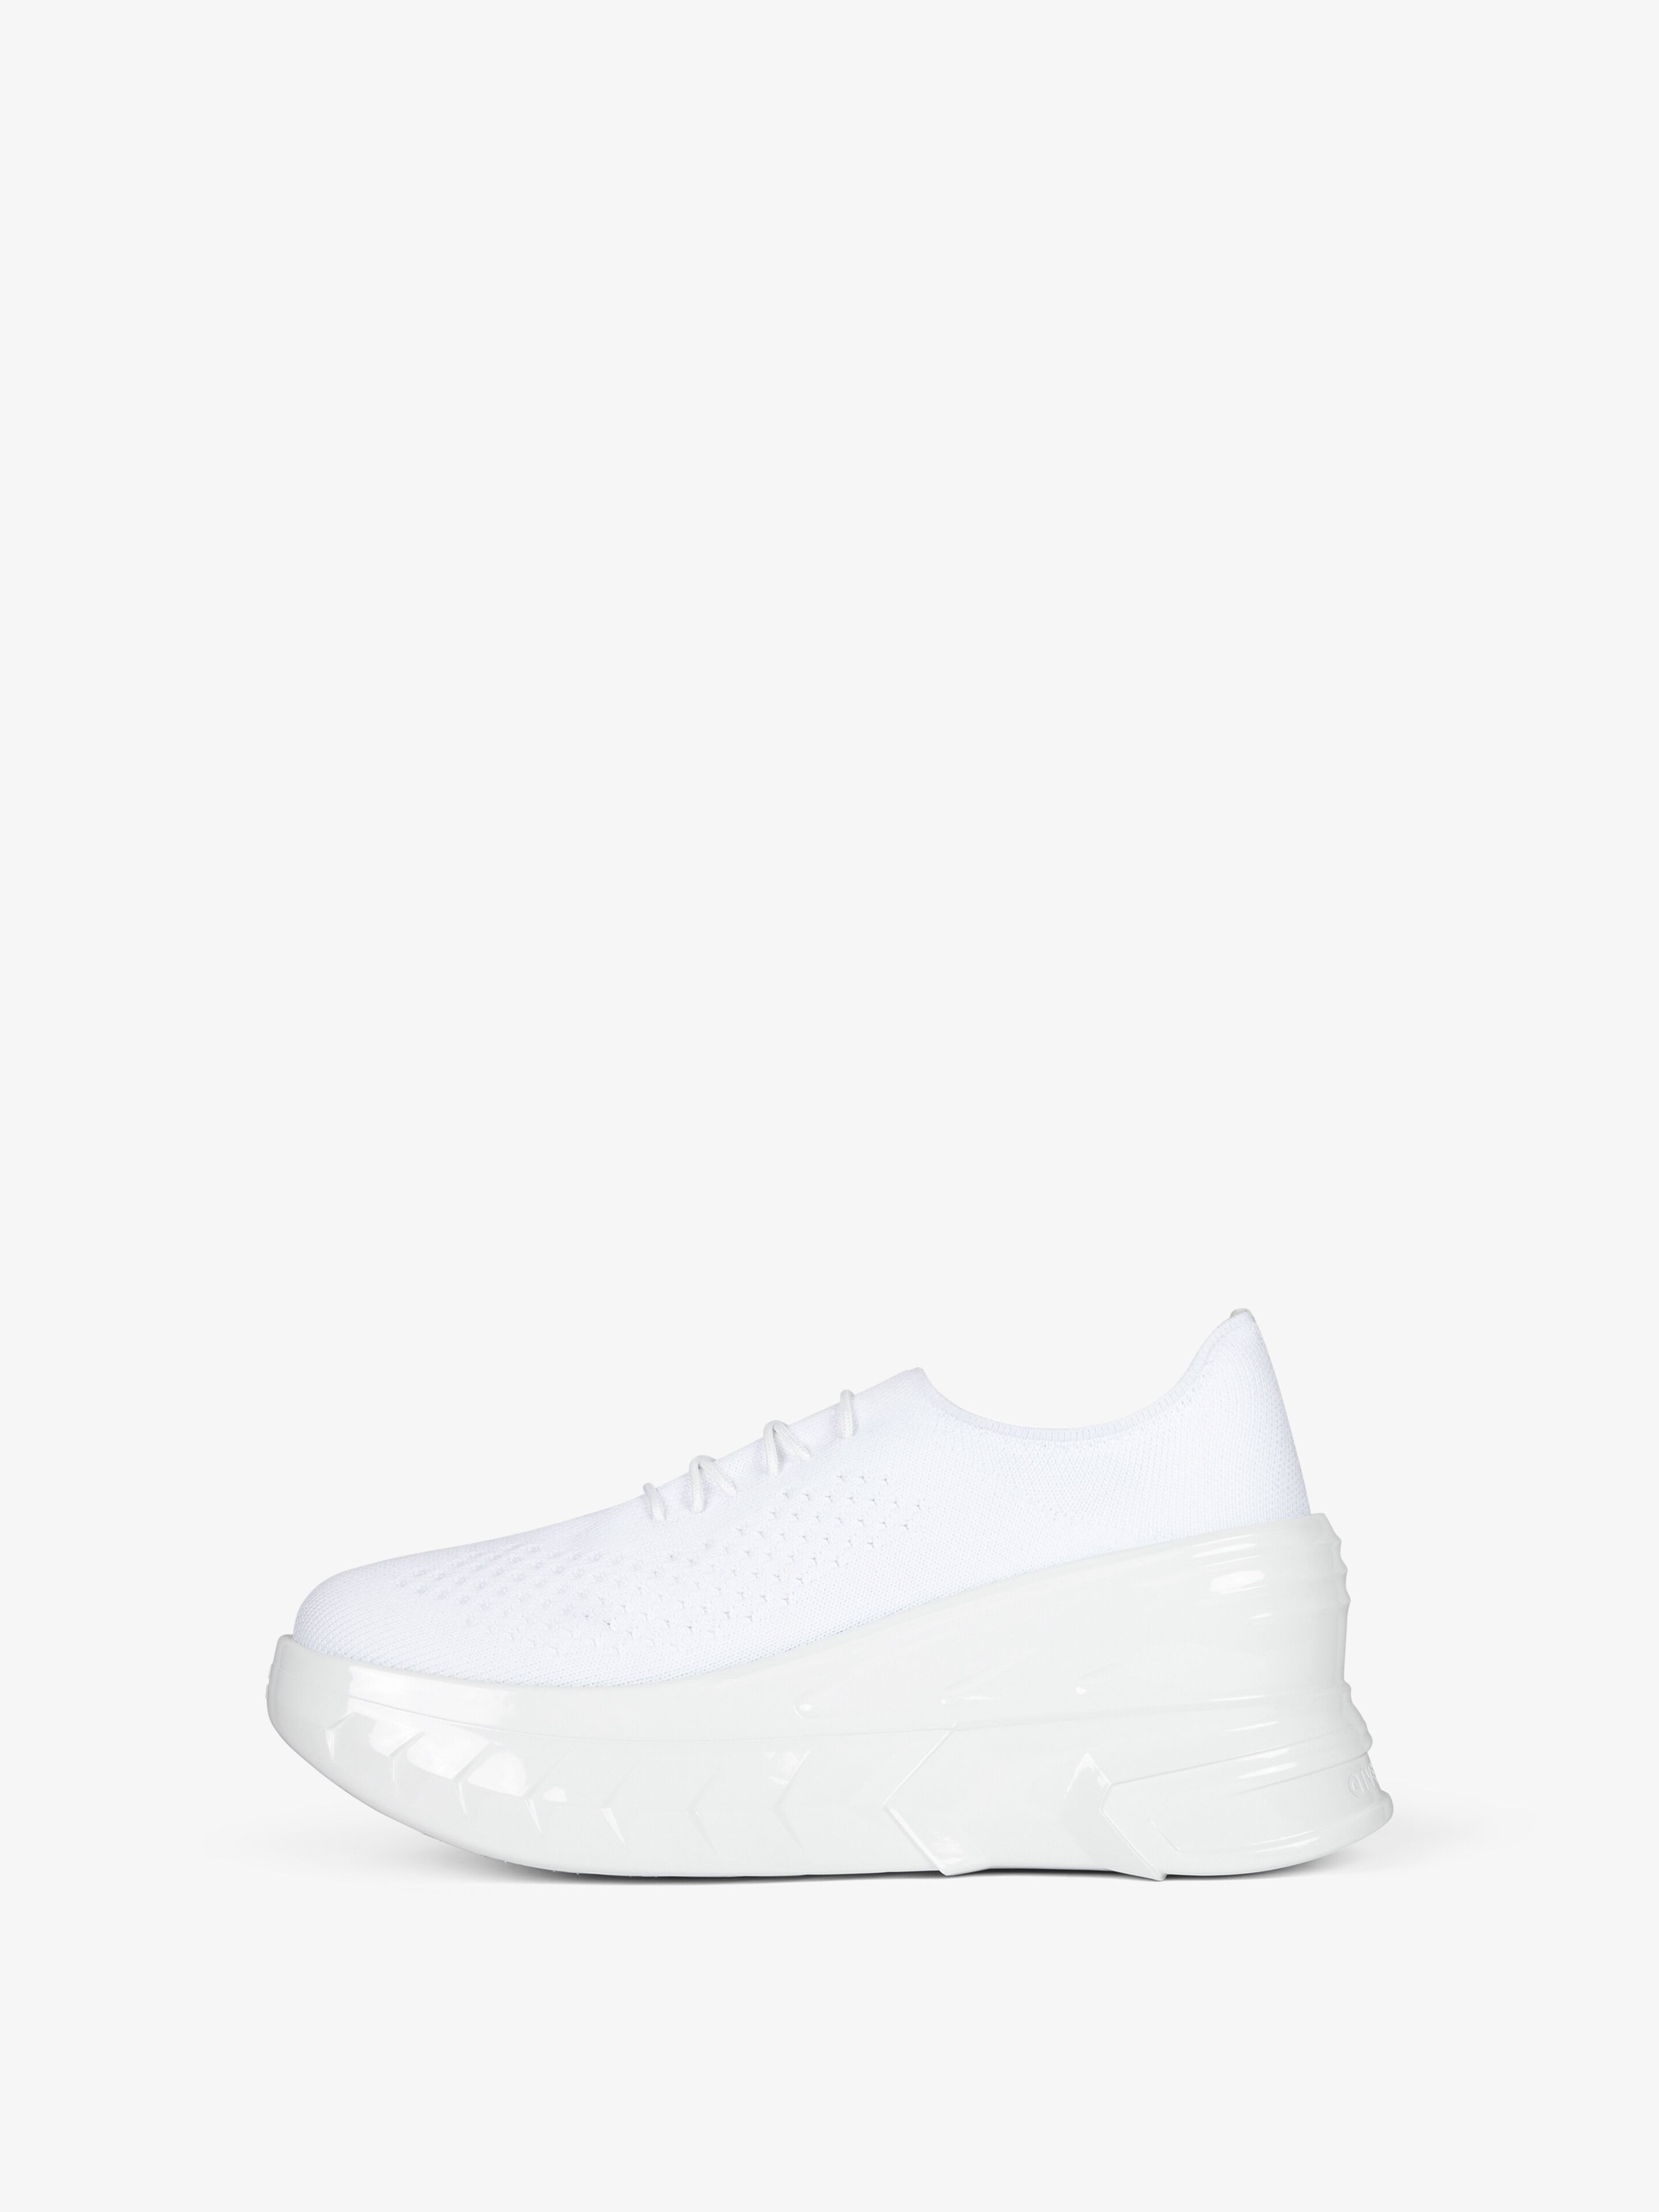 MARSHMALLOW WEDGE SNEAKERS IN RUBBER AND KNIT - 3